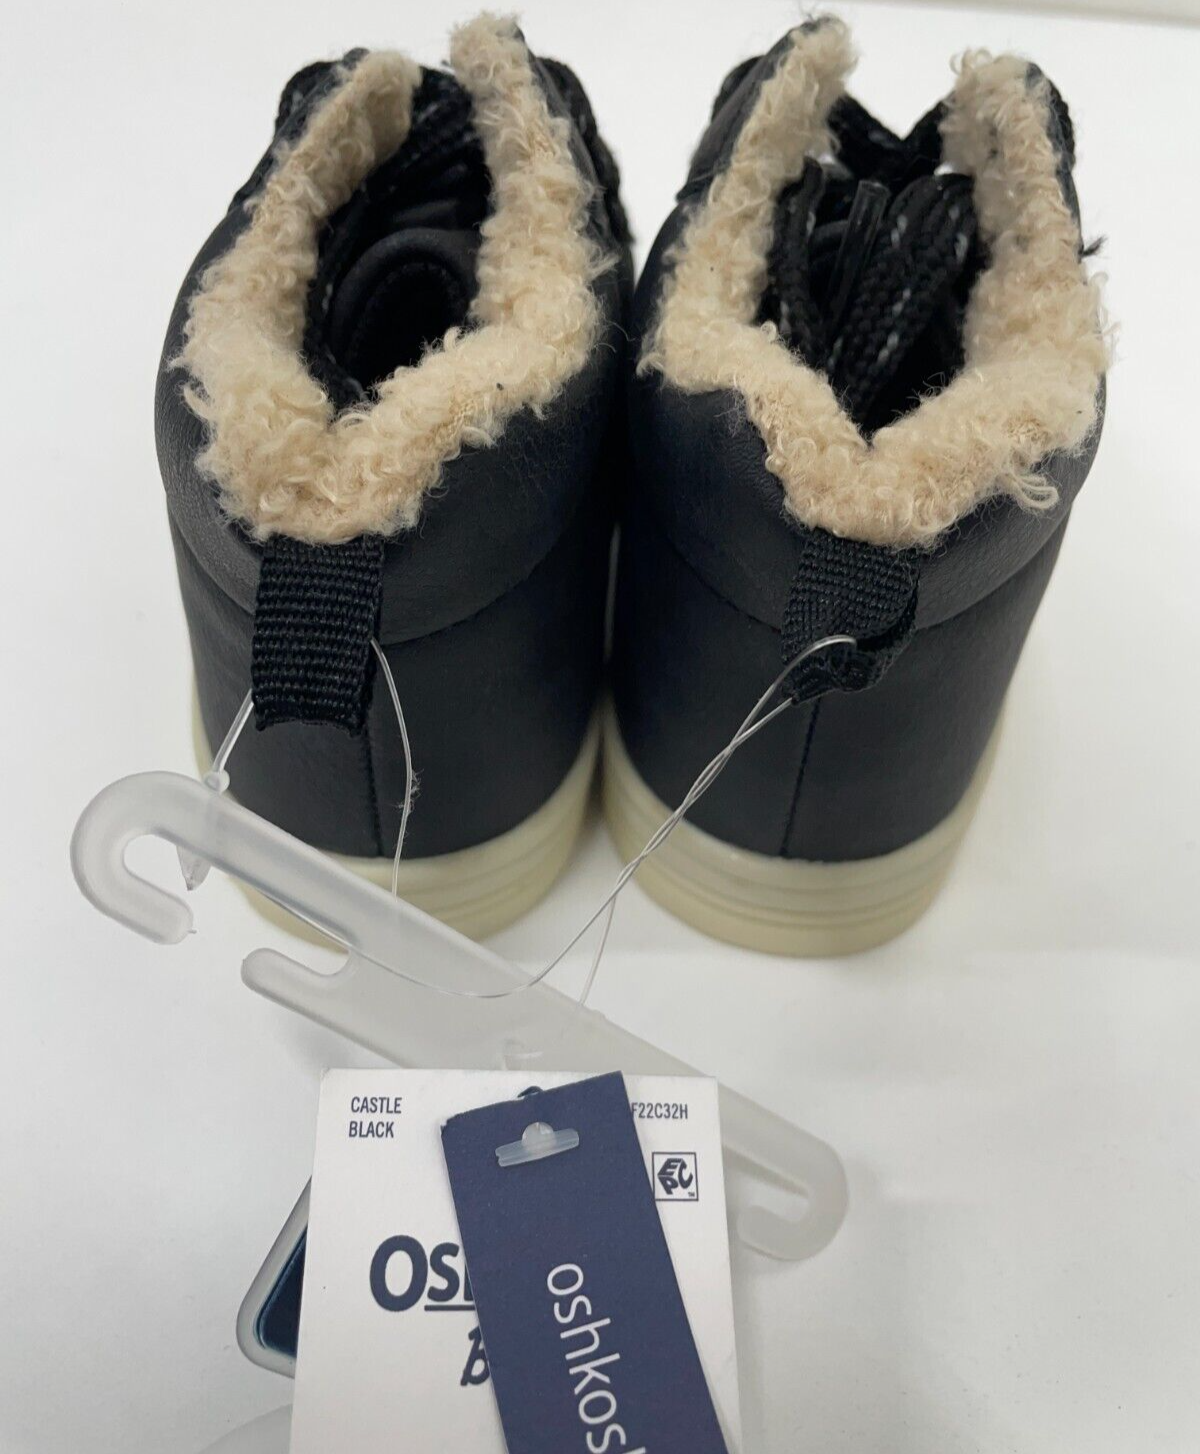 OshKosh B'gosh Toddler 9 Sherpa Detail Lace-Up Sneakers Black Faux Leather NEW